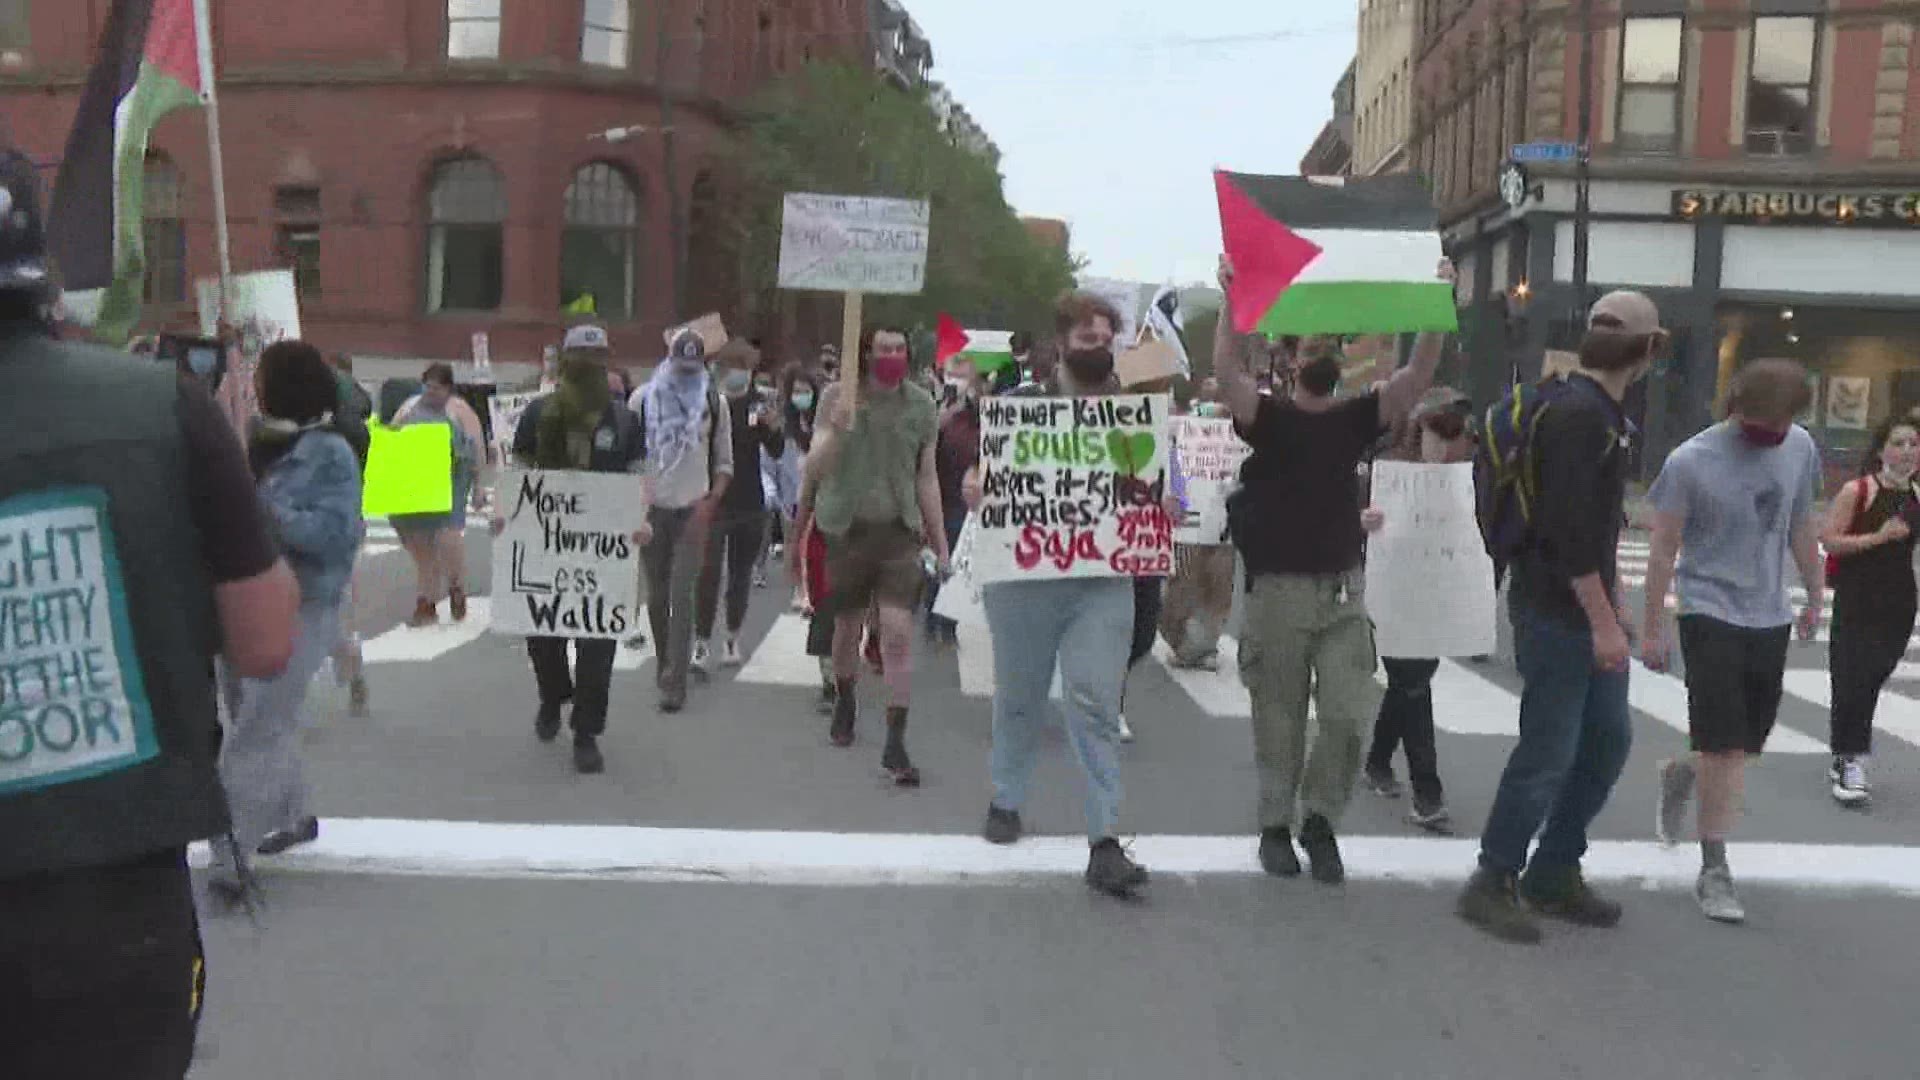 Protesters spent hours Wednesday evening marching through Portland, calling for peace in the Middle East and the end to violence against Palestinians.